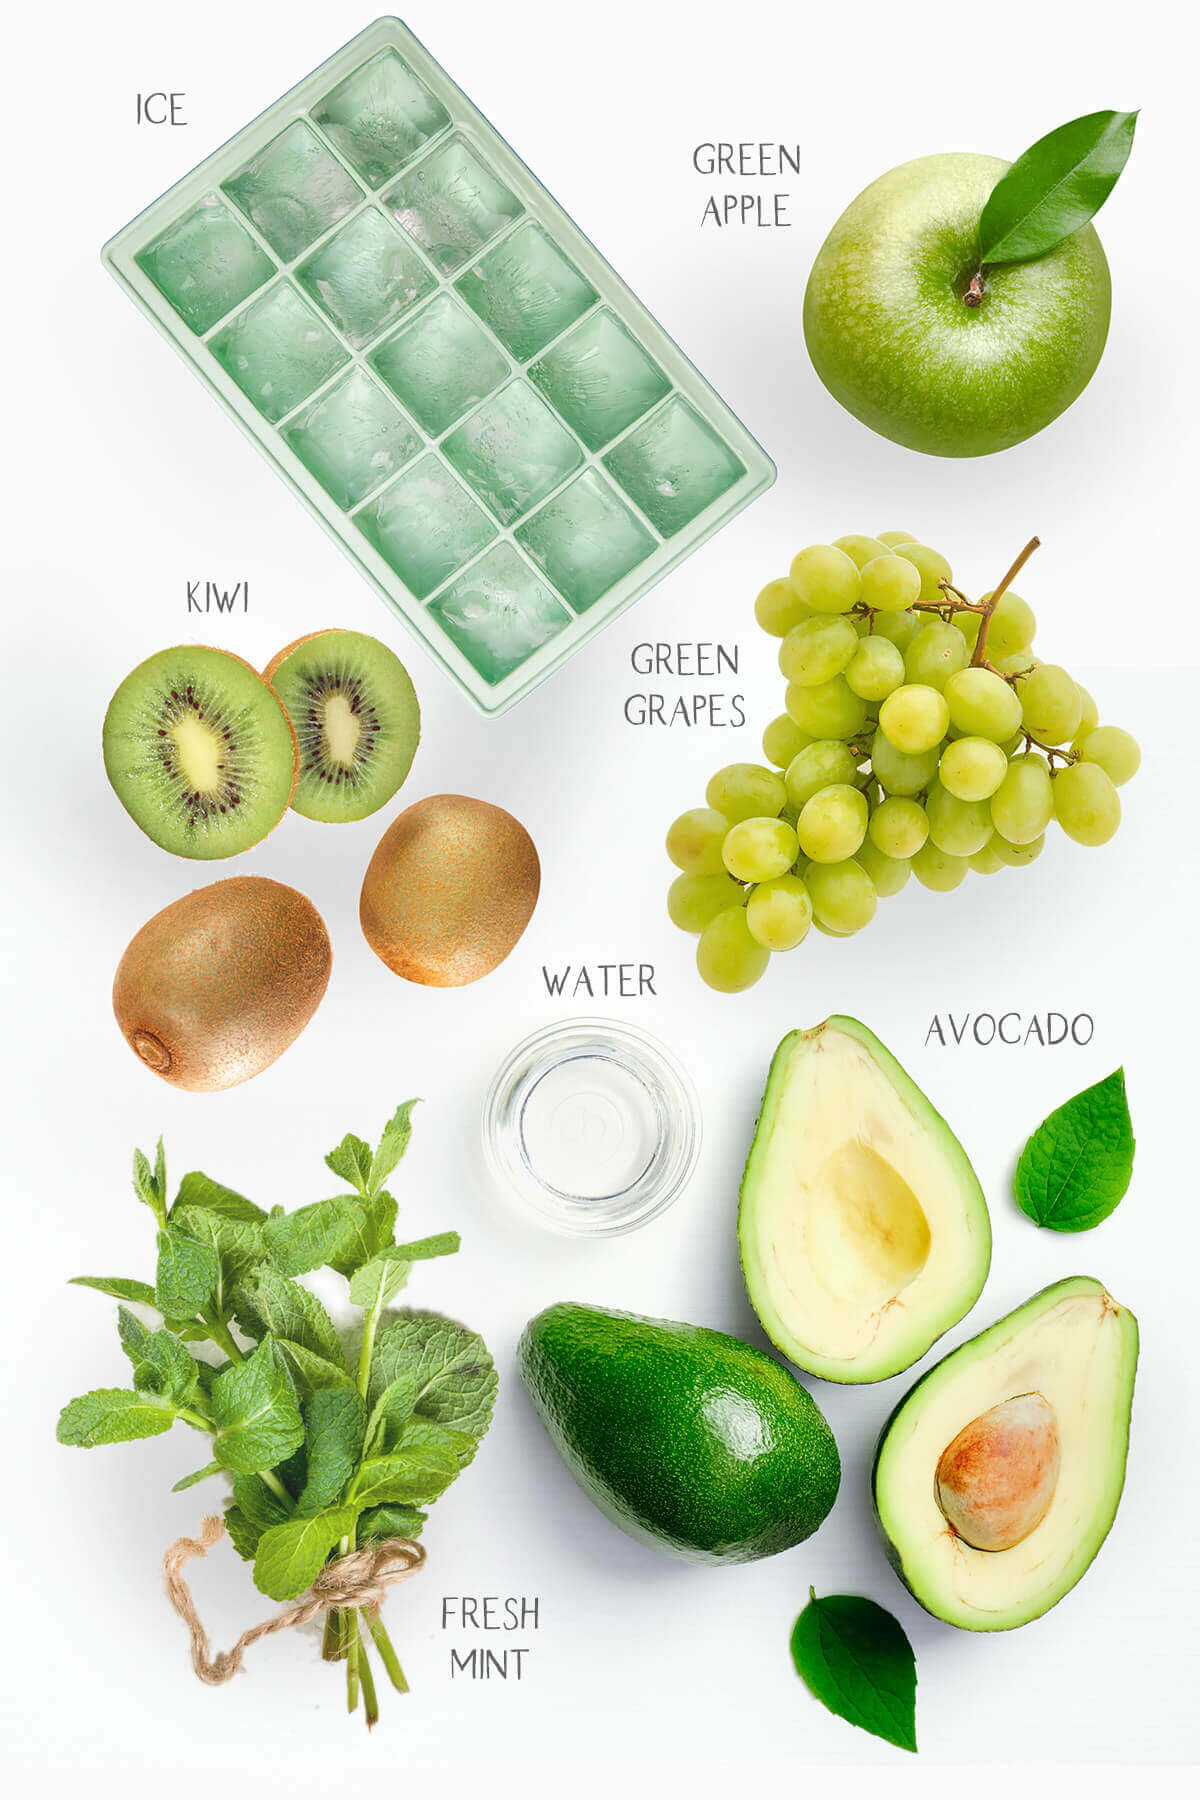 Ingredients labeled and needed to make kiwi smoothie